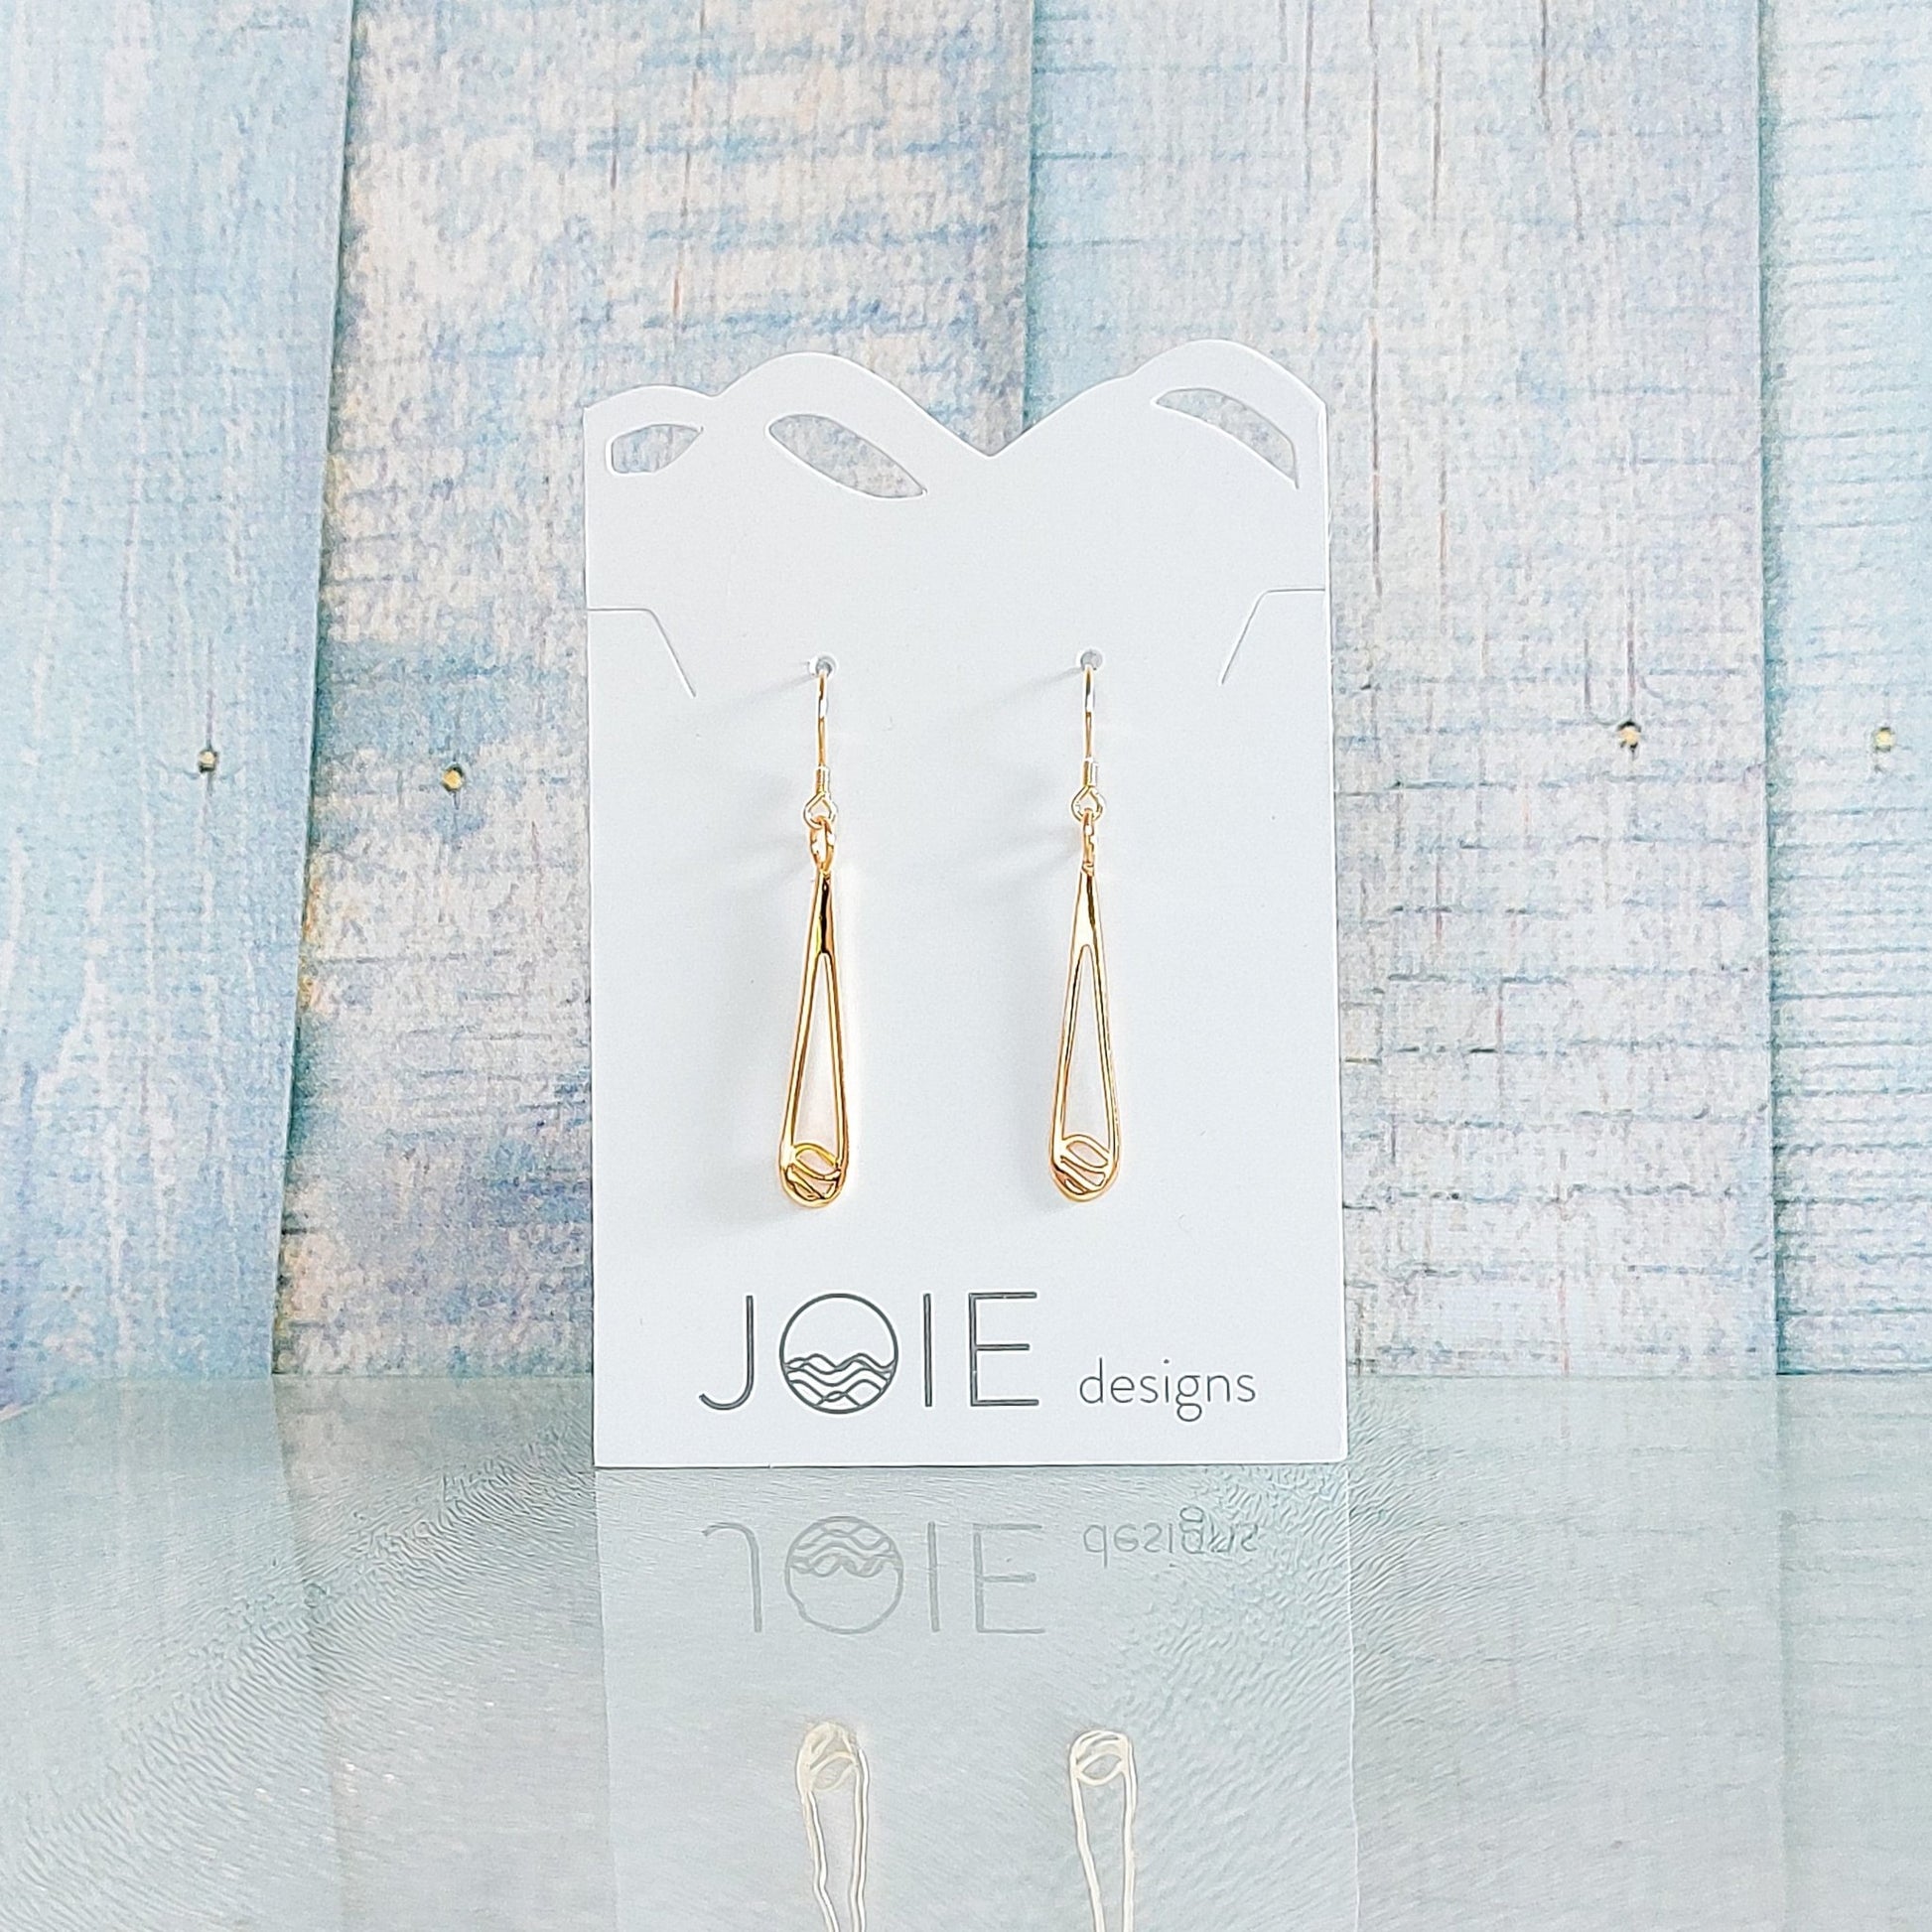 18k yellow gold plated indra raindrop design earrings showcased on a jewellery card with blue wooden background